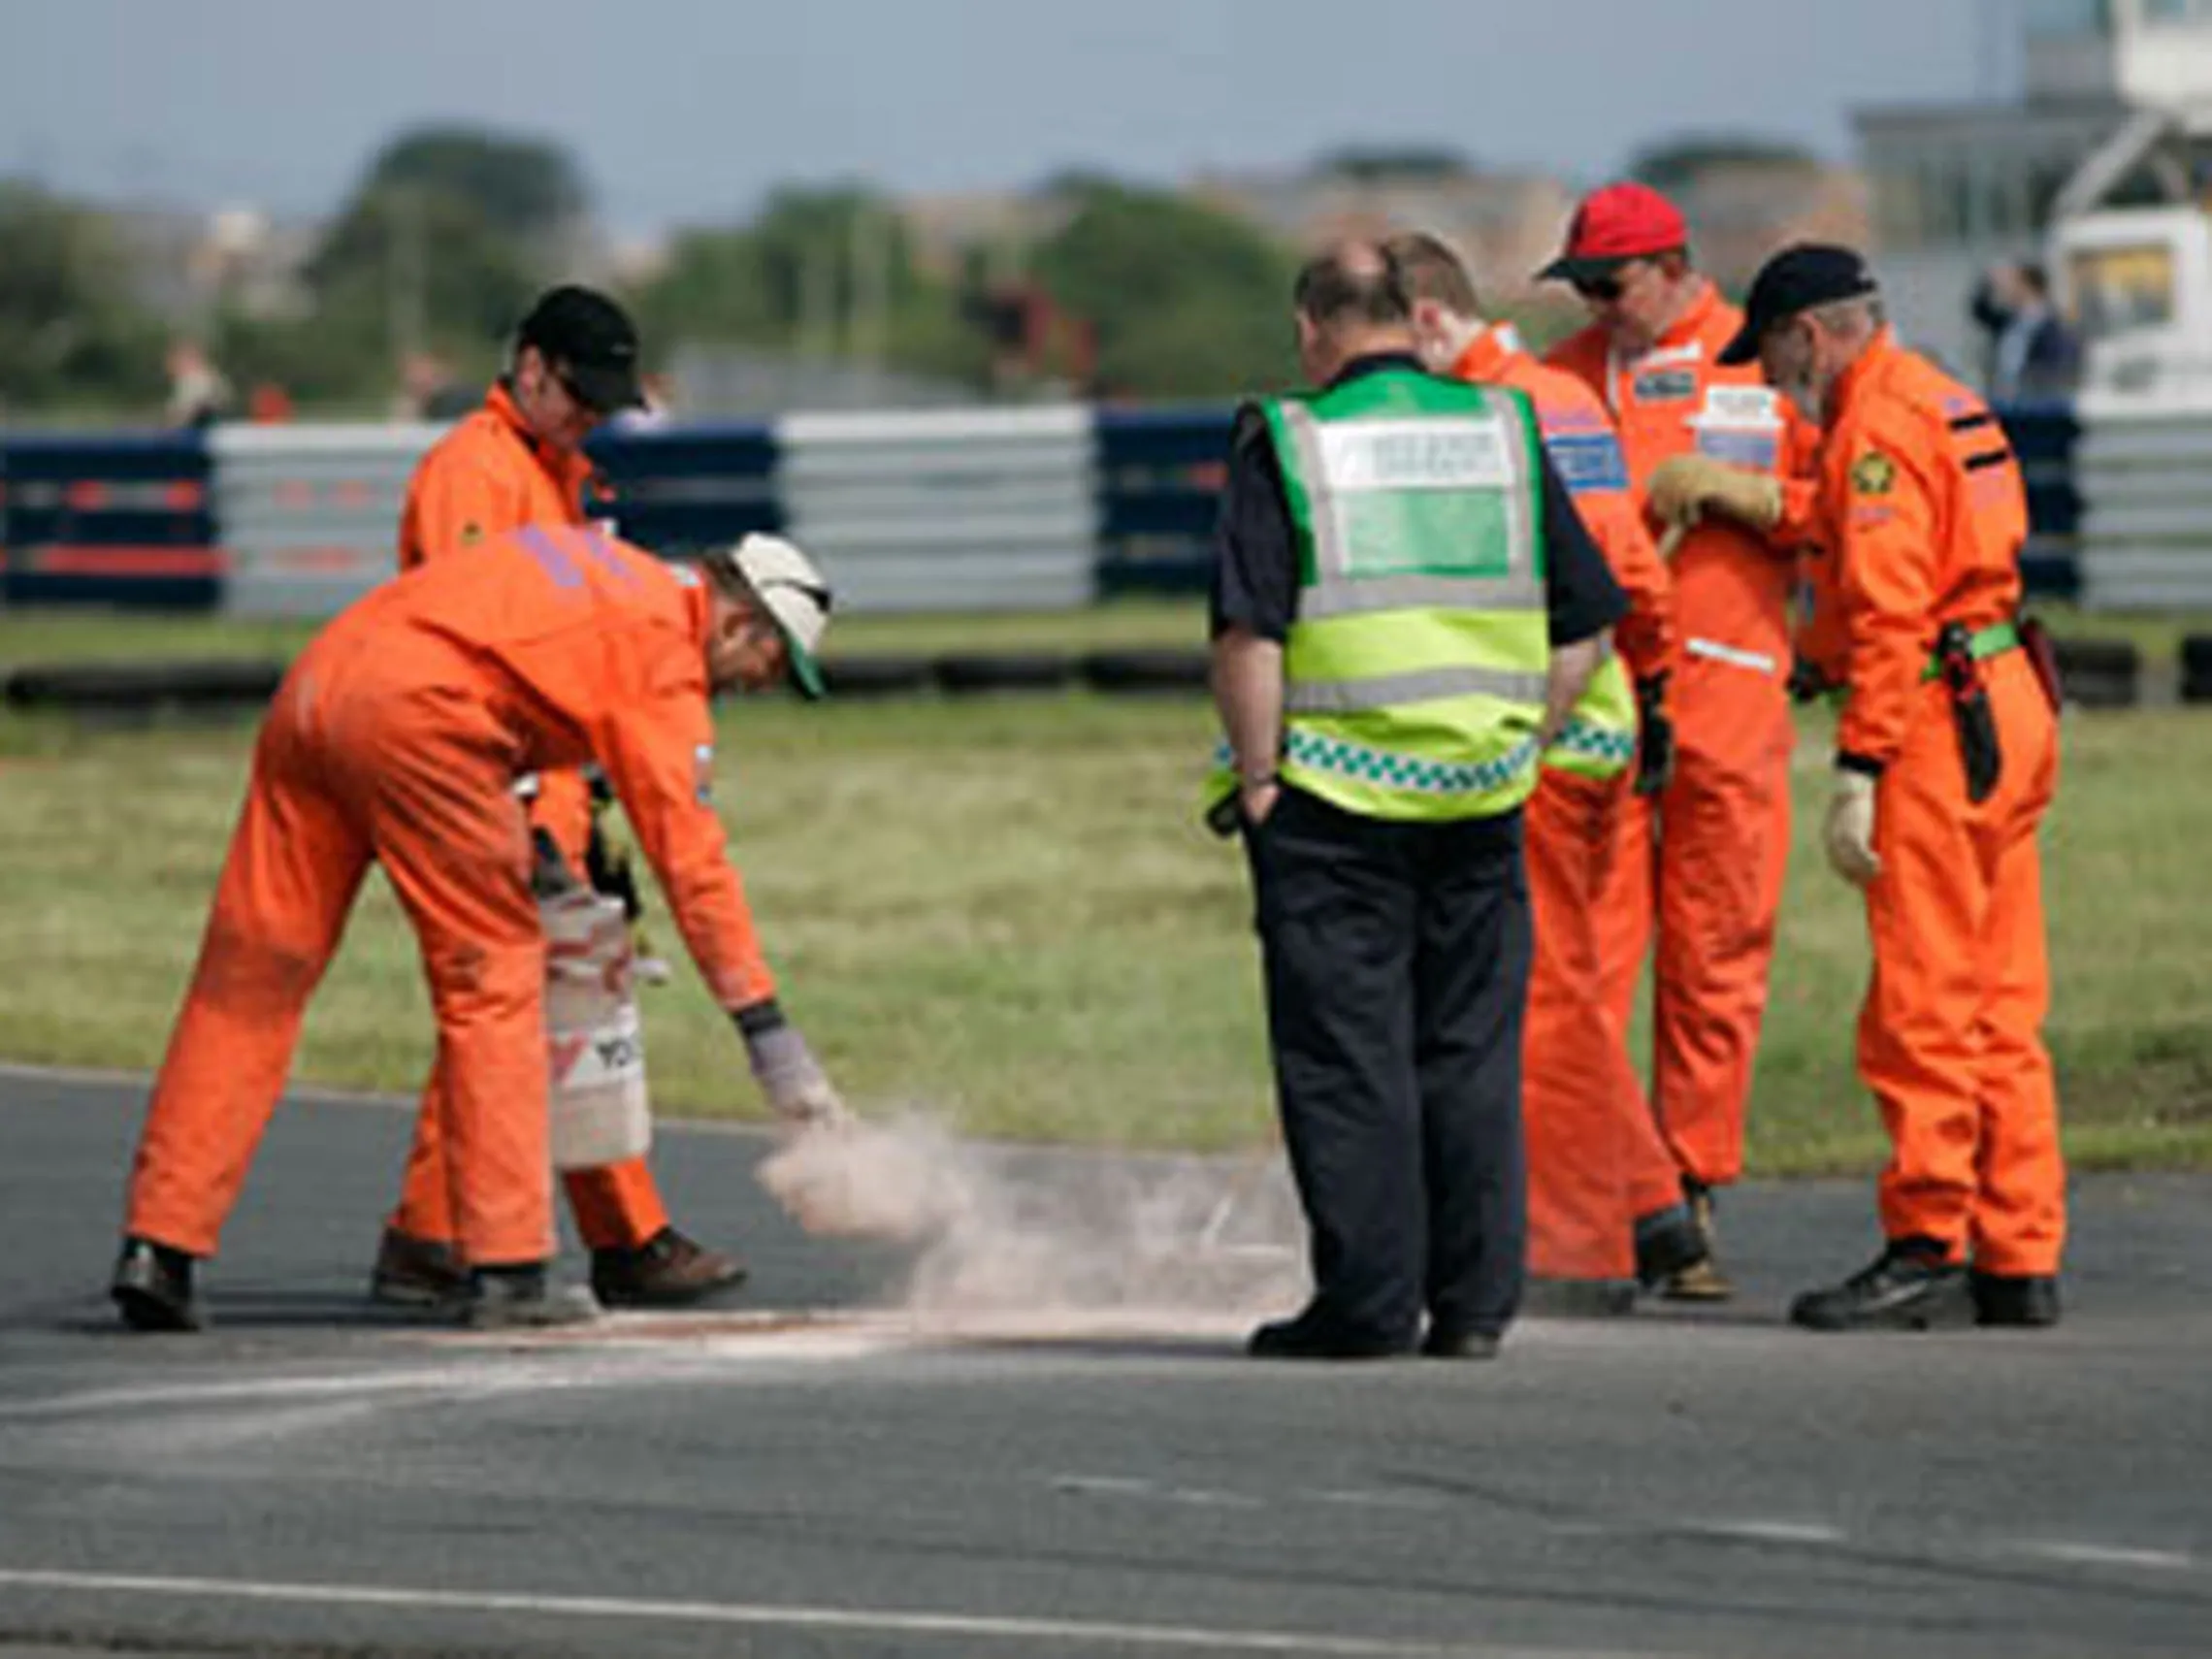 employees spilling polycaptor or trivorex-type absorbent powder on the road